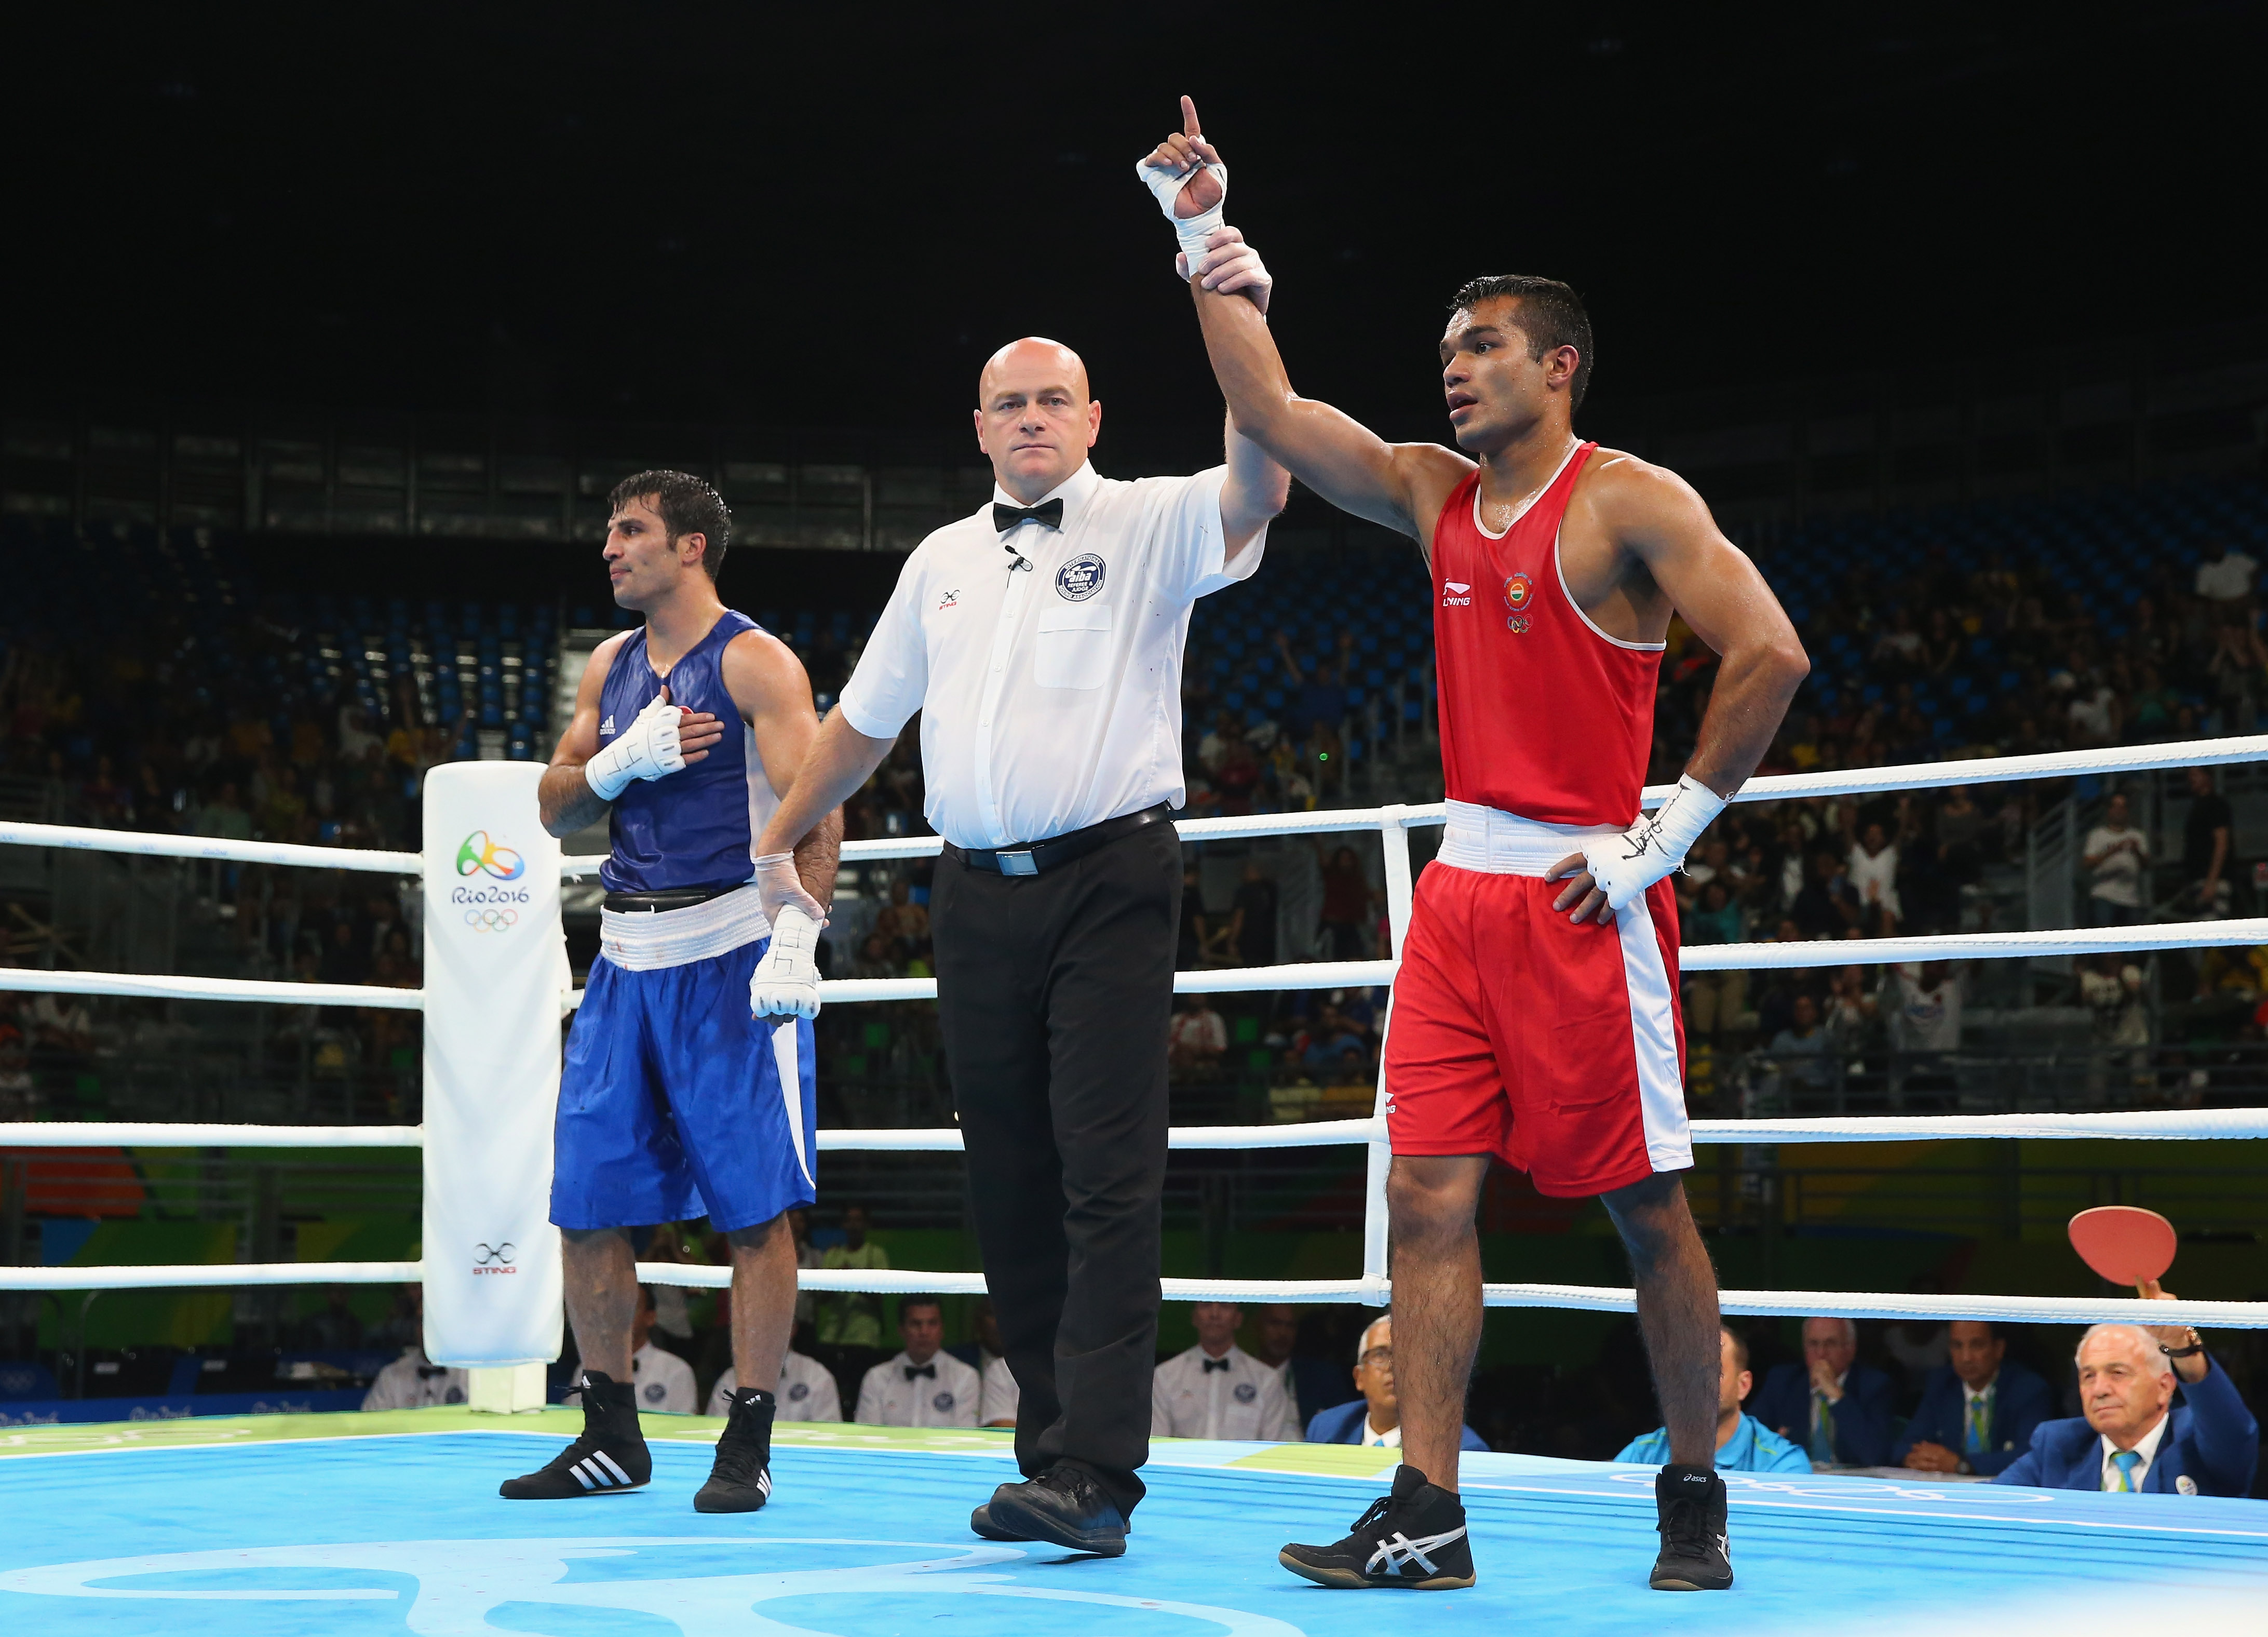 Vikas Krishan: If I am able to defeat (Melikuziev) him, I will return home with a gold